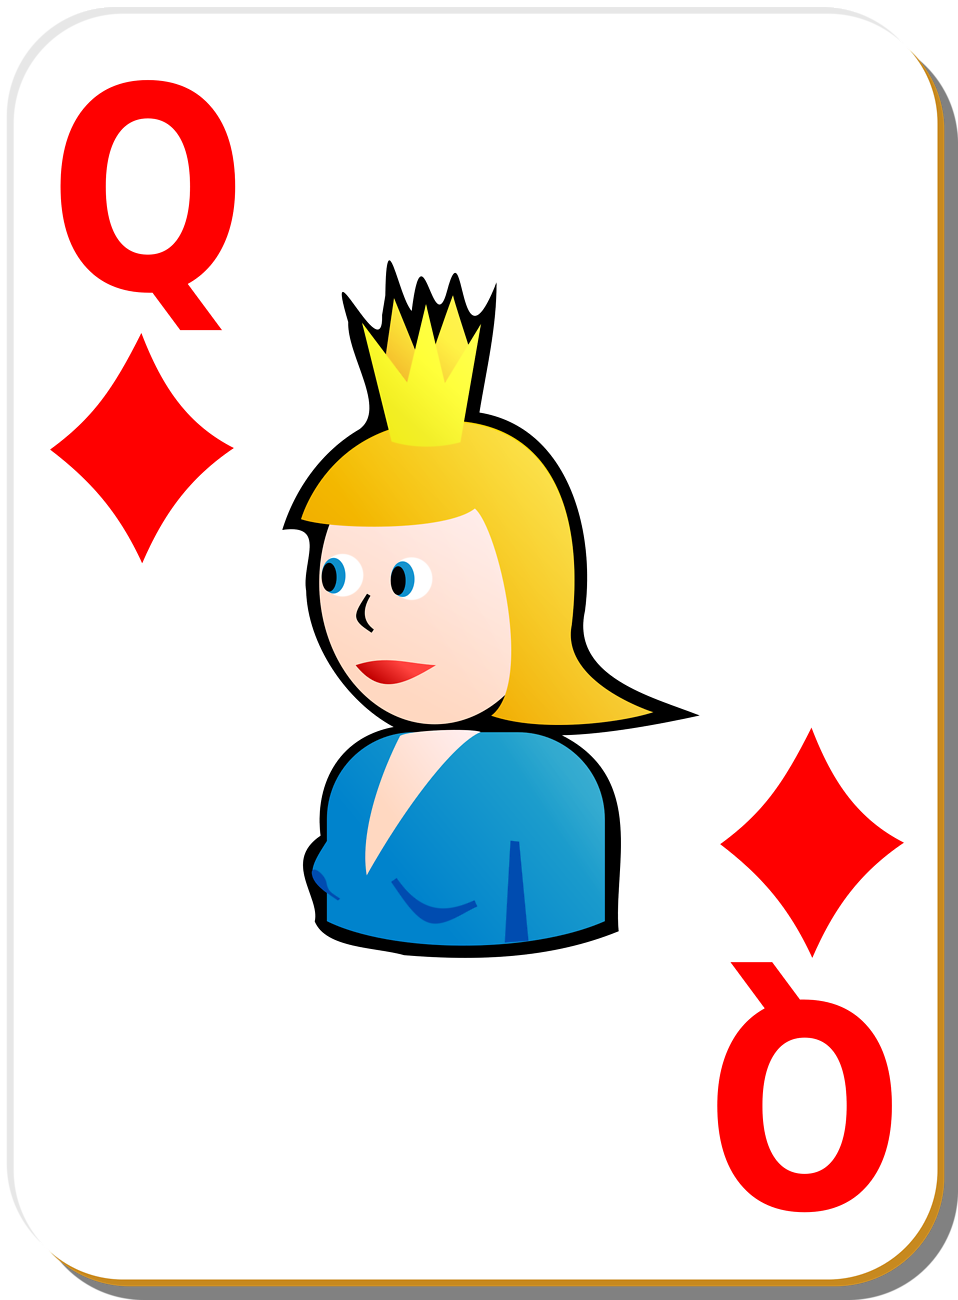 playing cards clipart image search results